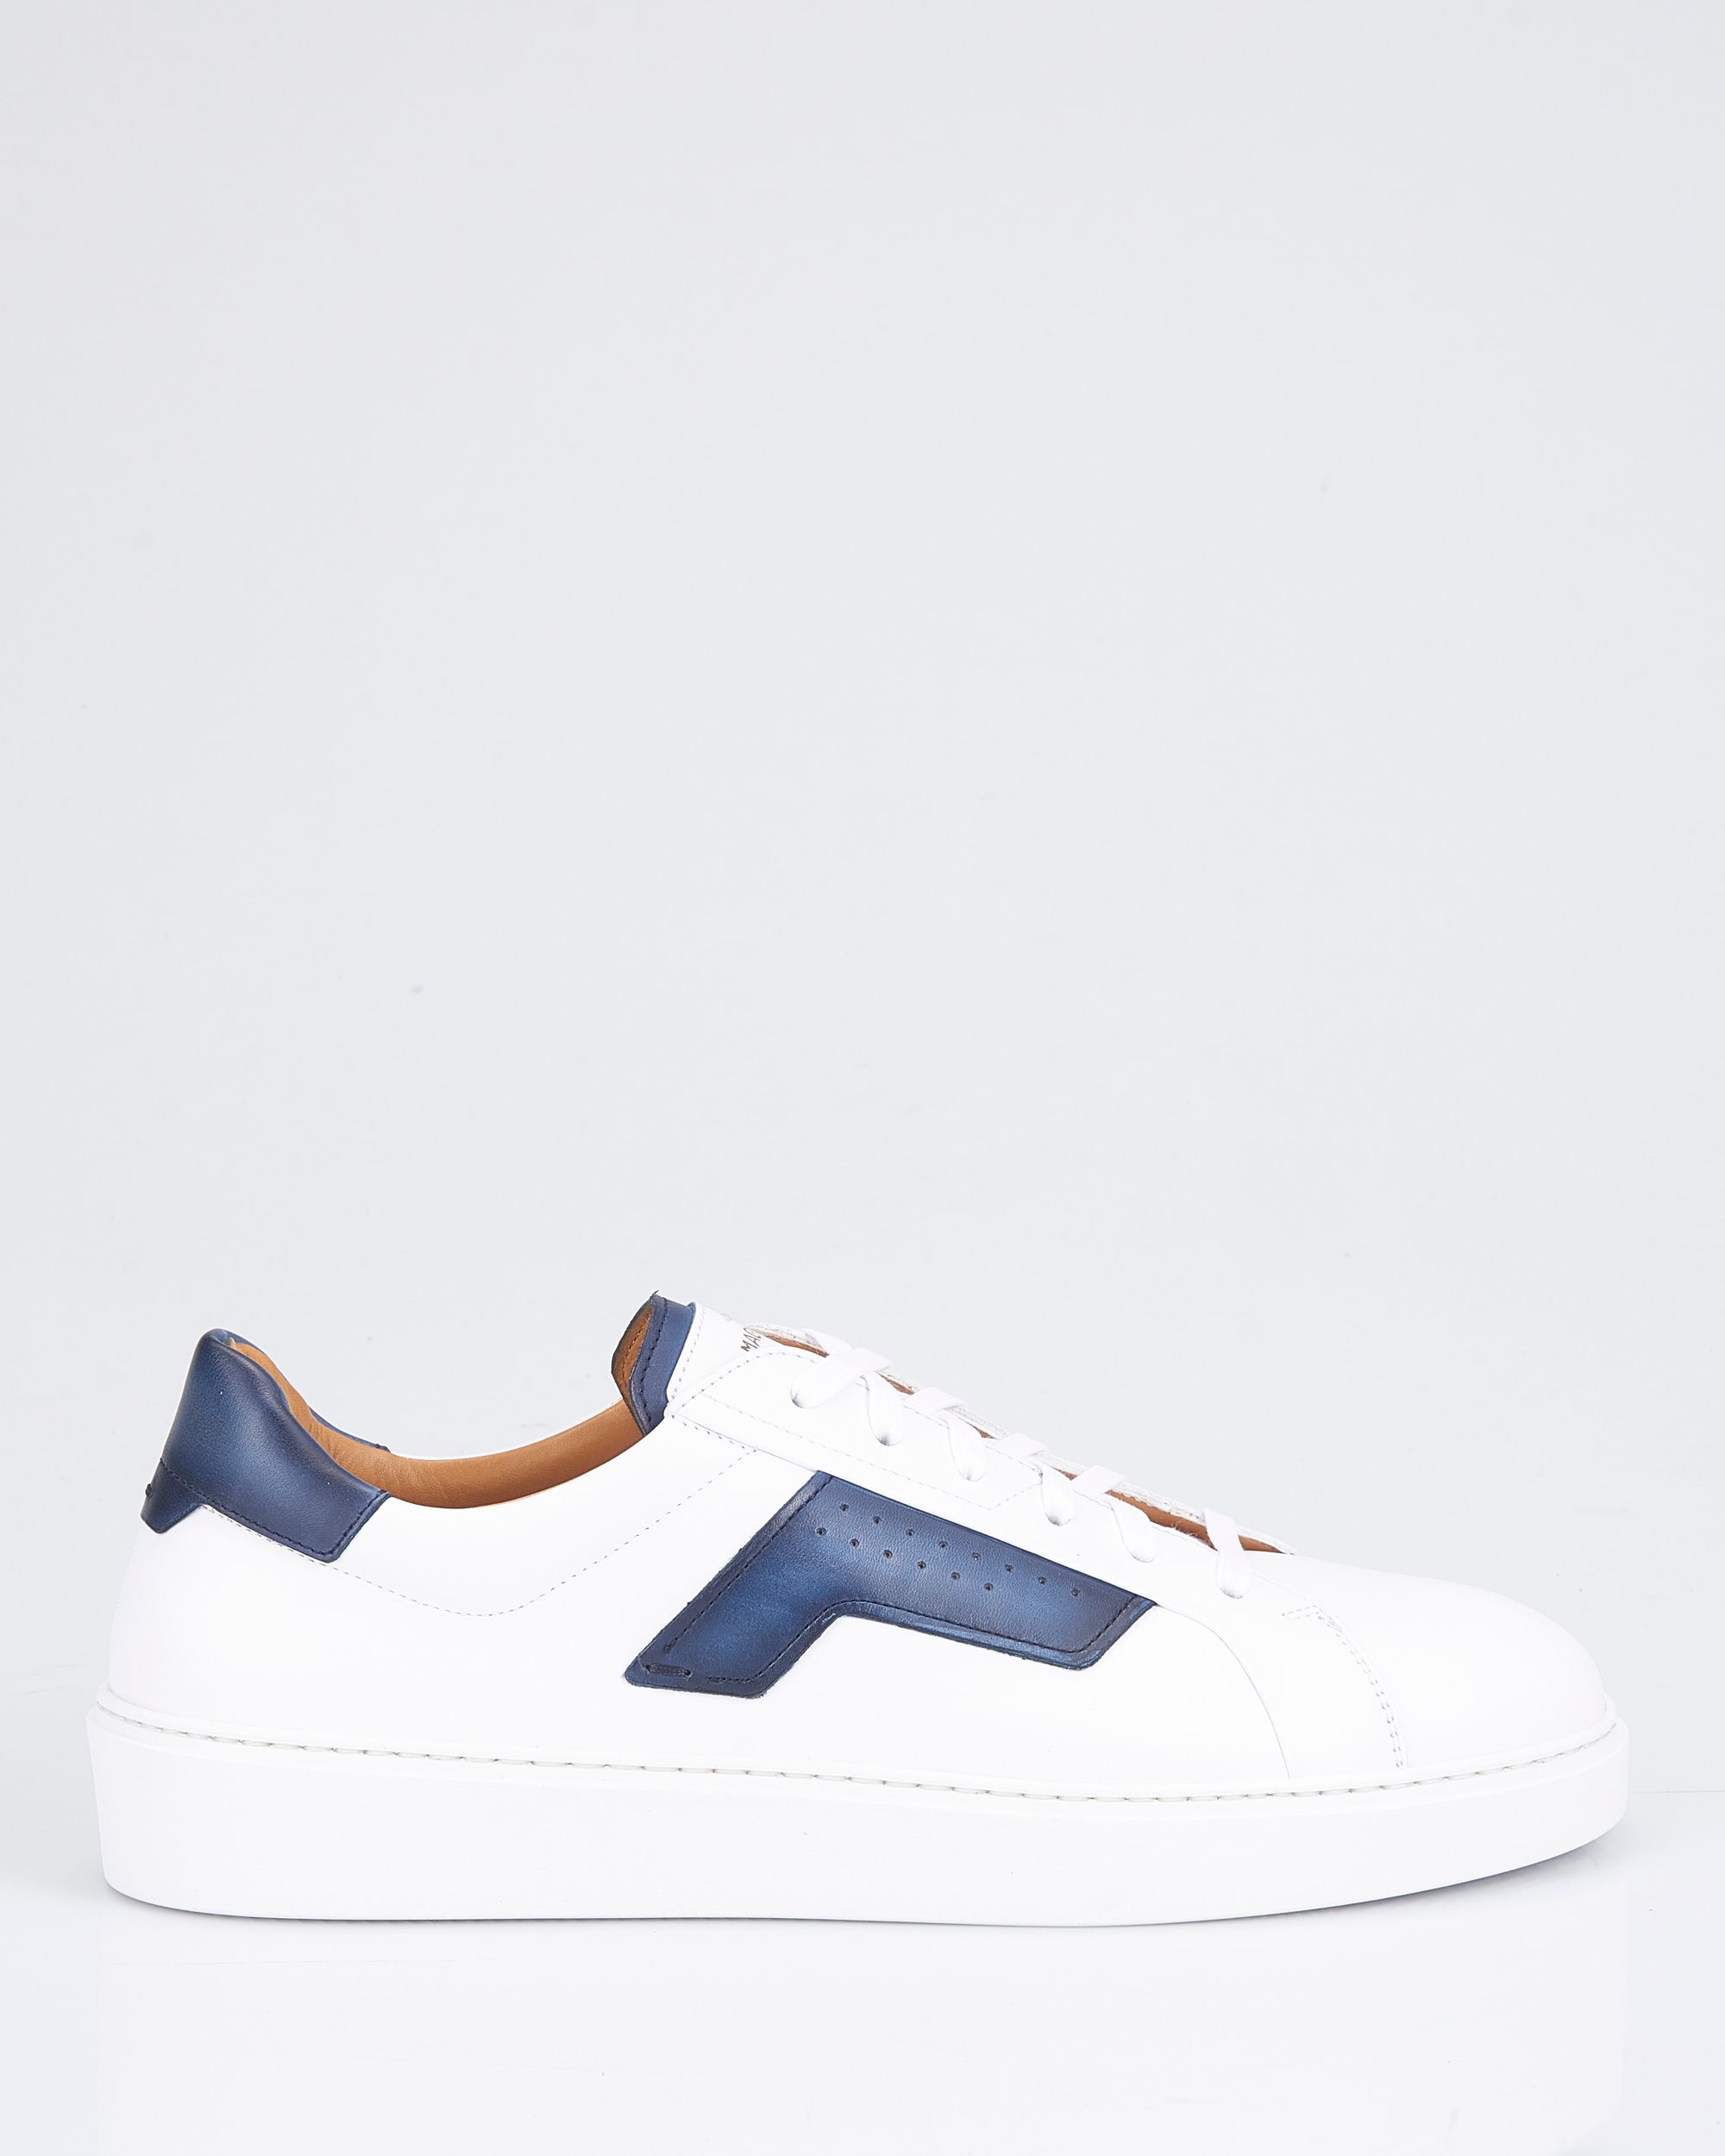 Magnanni Sneakers Donker blauw 086796-001-41